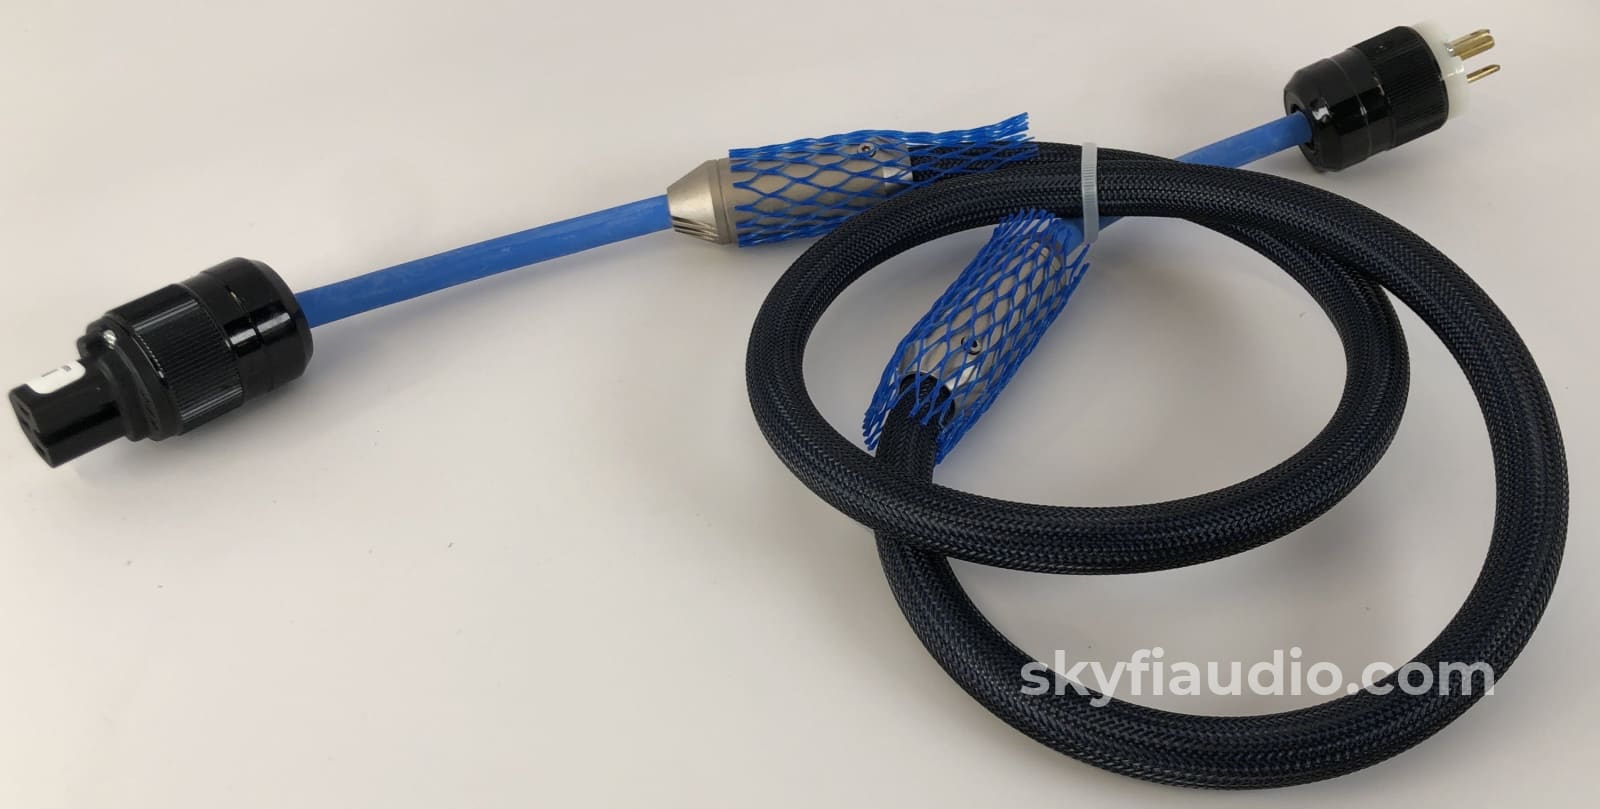 Siltech Cables - Like New Ruby Hill 15A Power Cable 1M (2 Of 3)